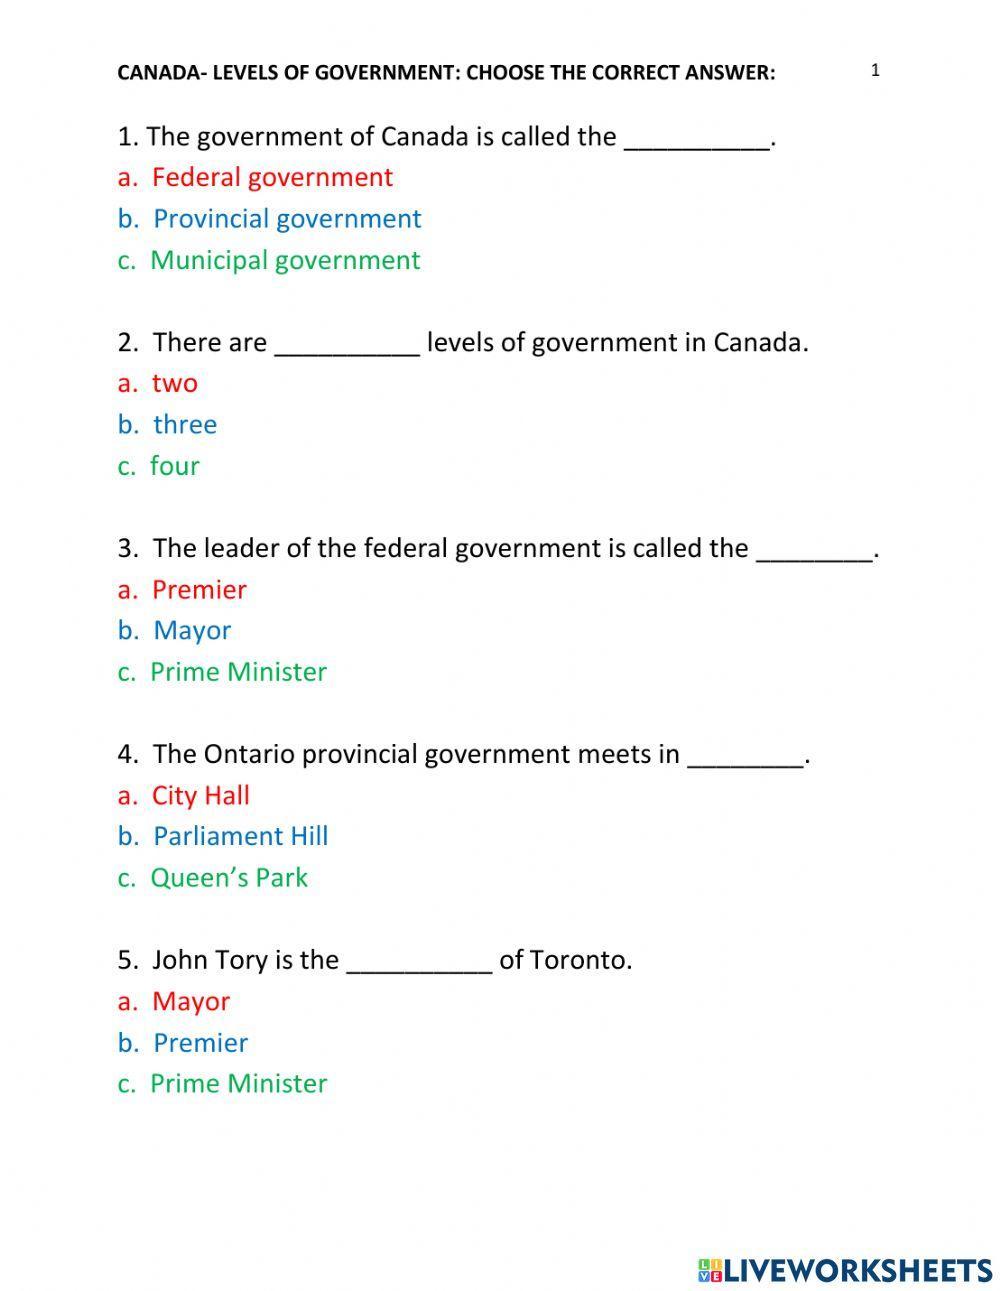 Canada - Levels of Government- multiple choice